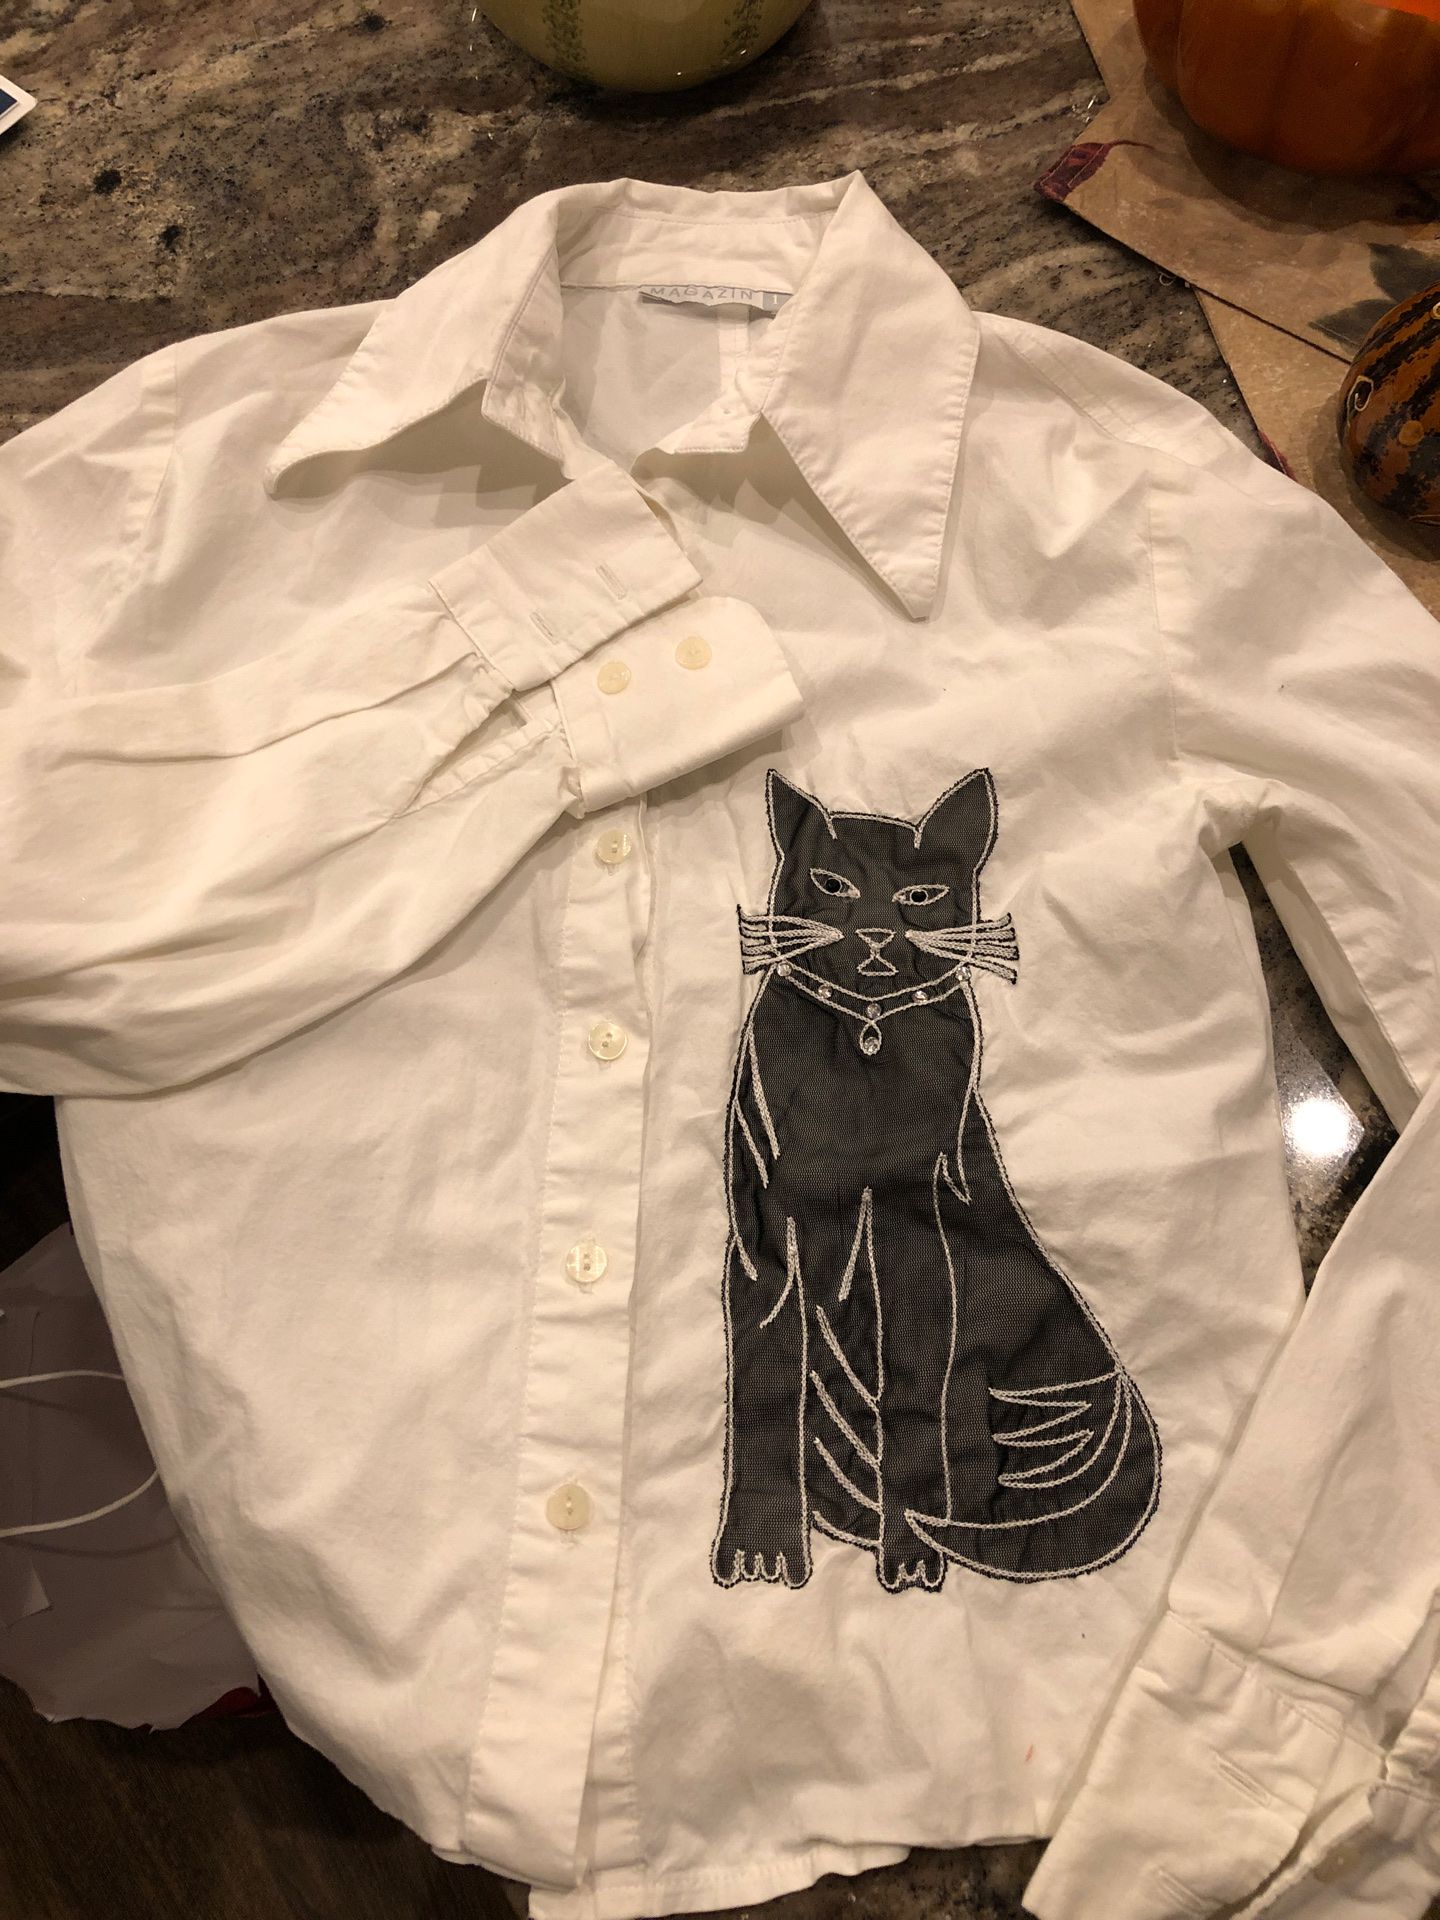 Women’s cat fitted button blouse shirt size 1 white